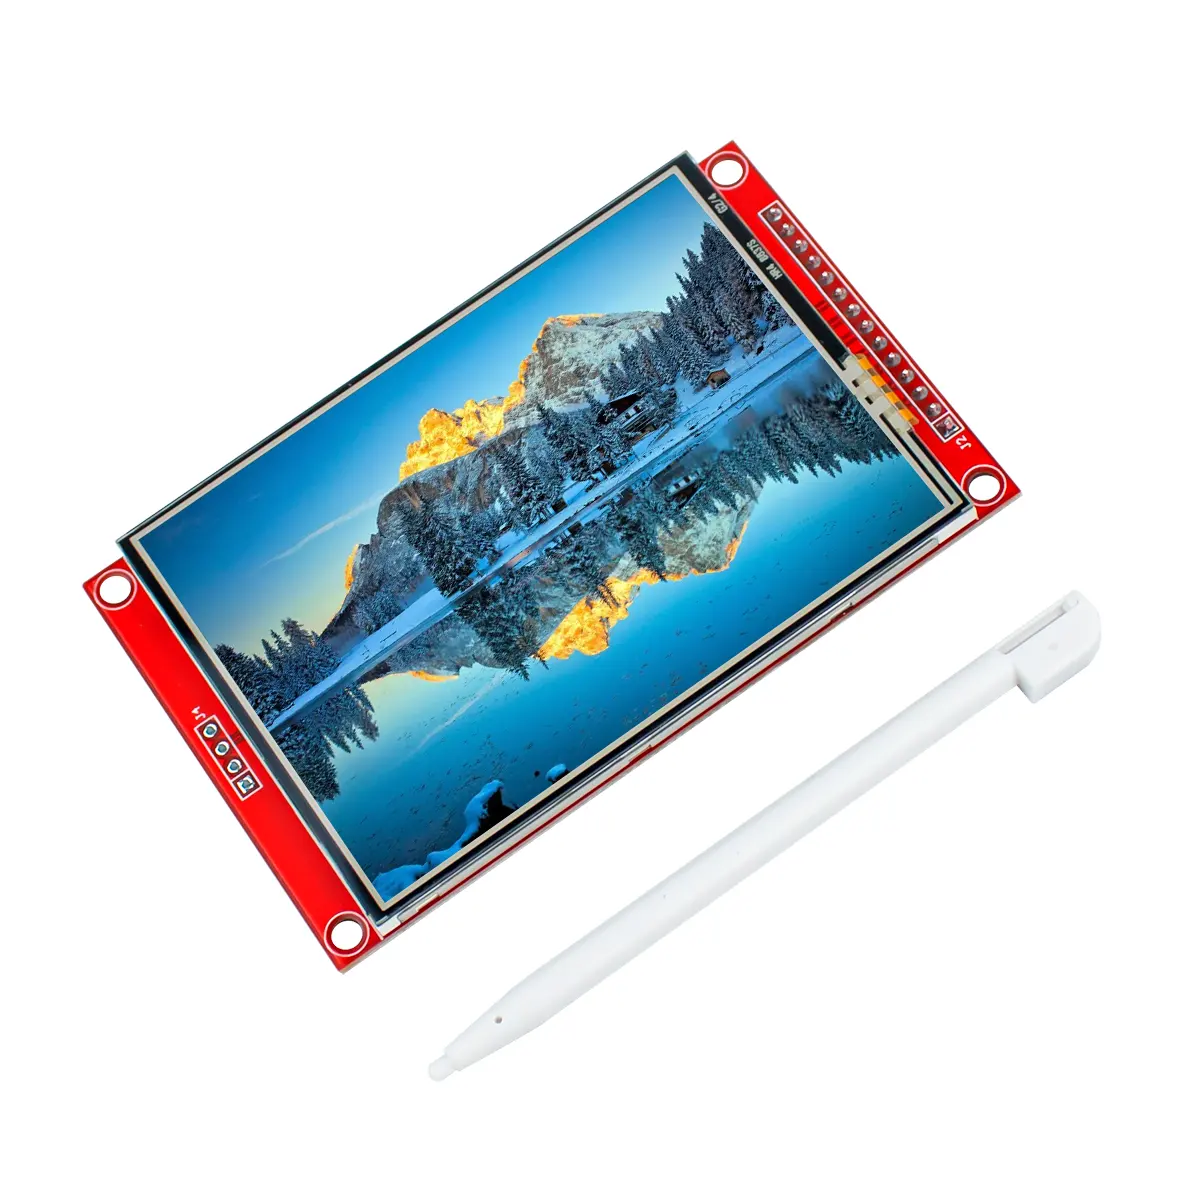 3.2 Inch 320*240 SPI Serial TFT LCD Module Display Screen with Touch Panel Driver IC ILI9341 for arduino/stm32